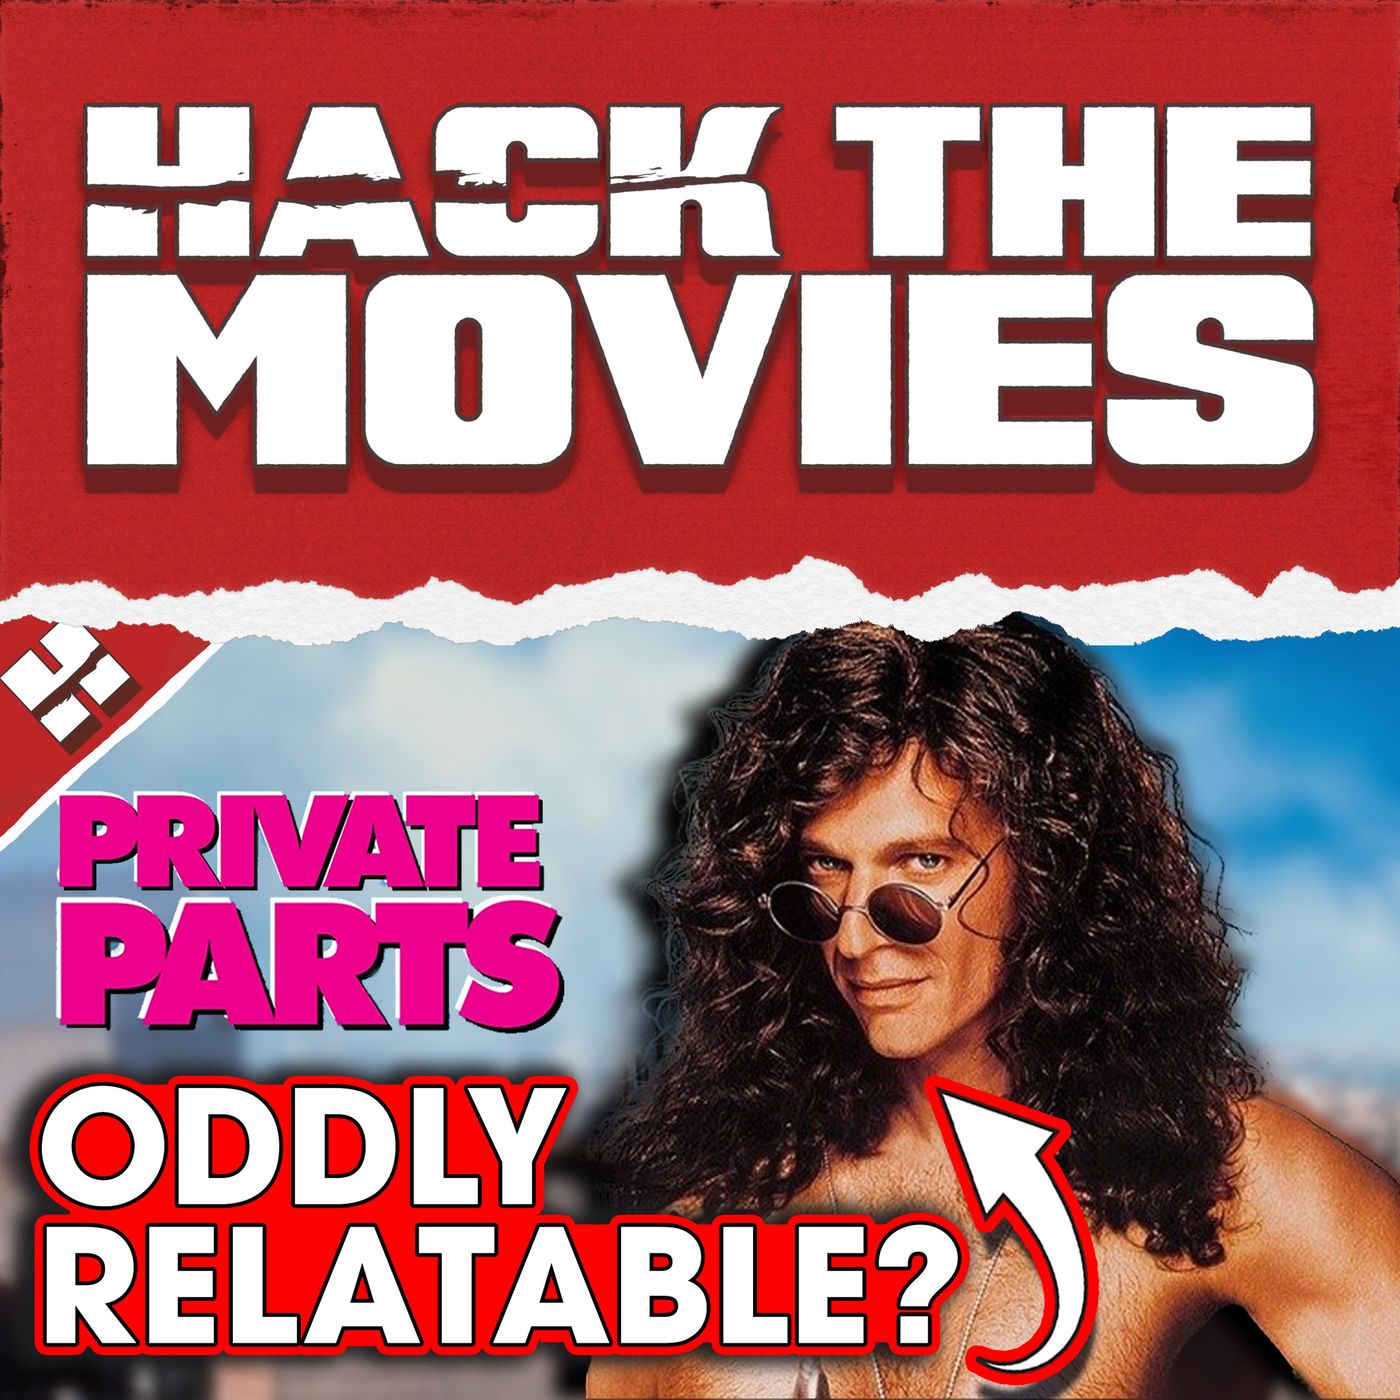 Is Private Parts (1997) Oddly Relatable? - Talking About Tapes (#145)